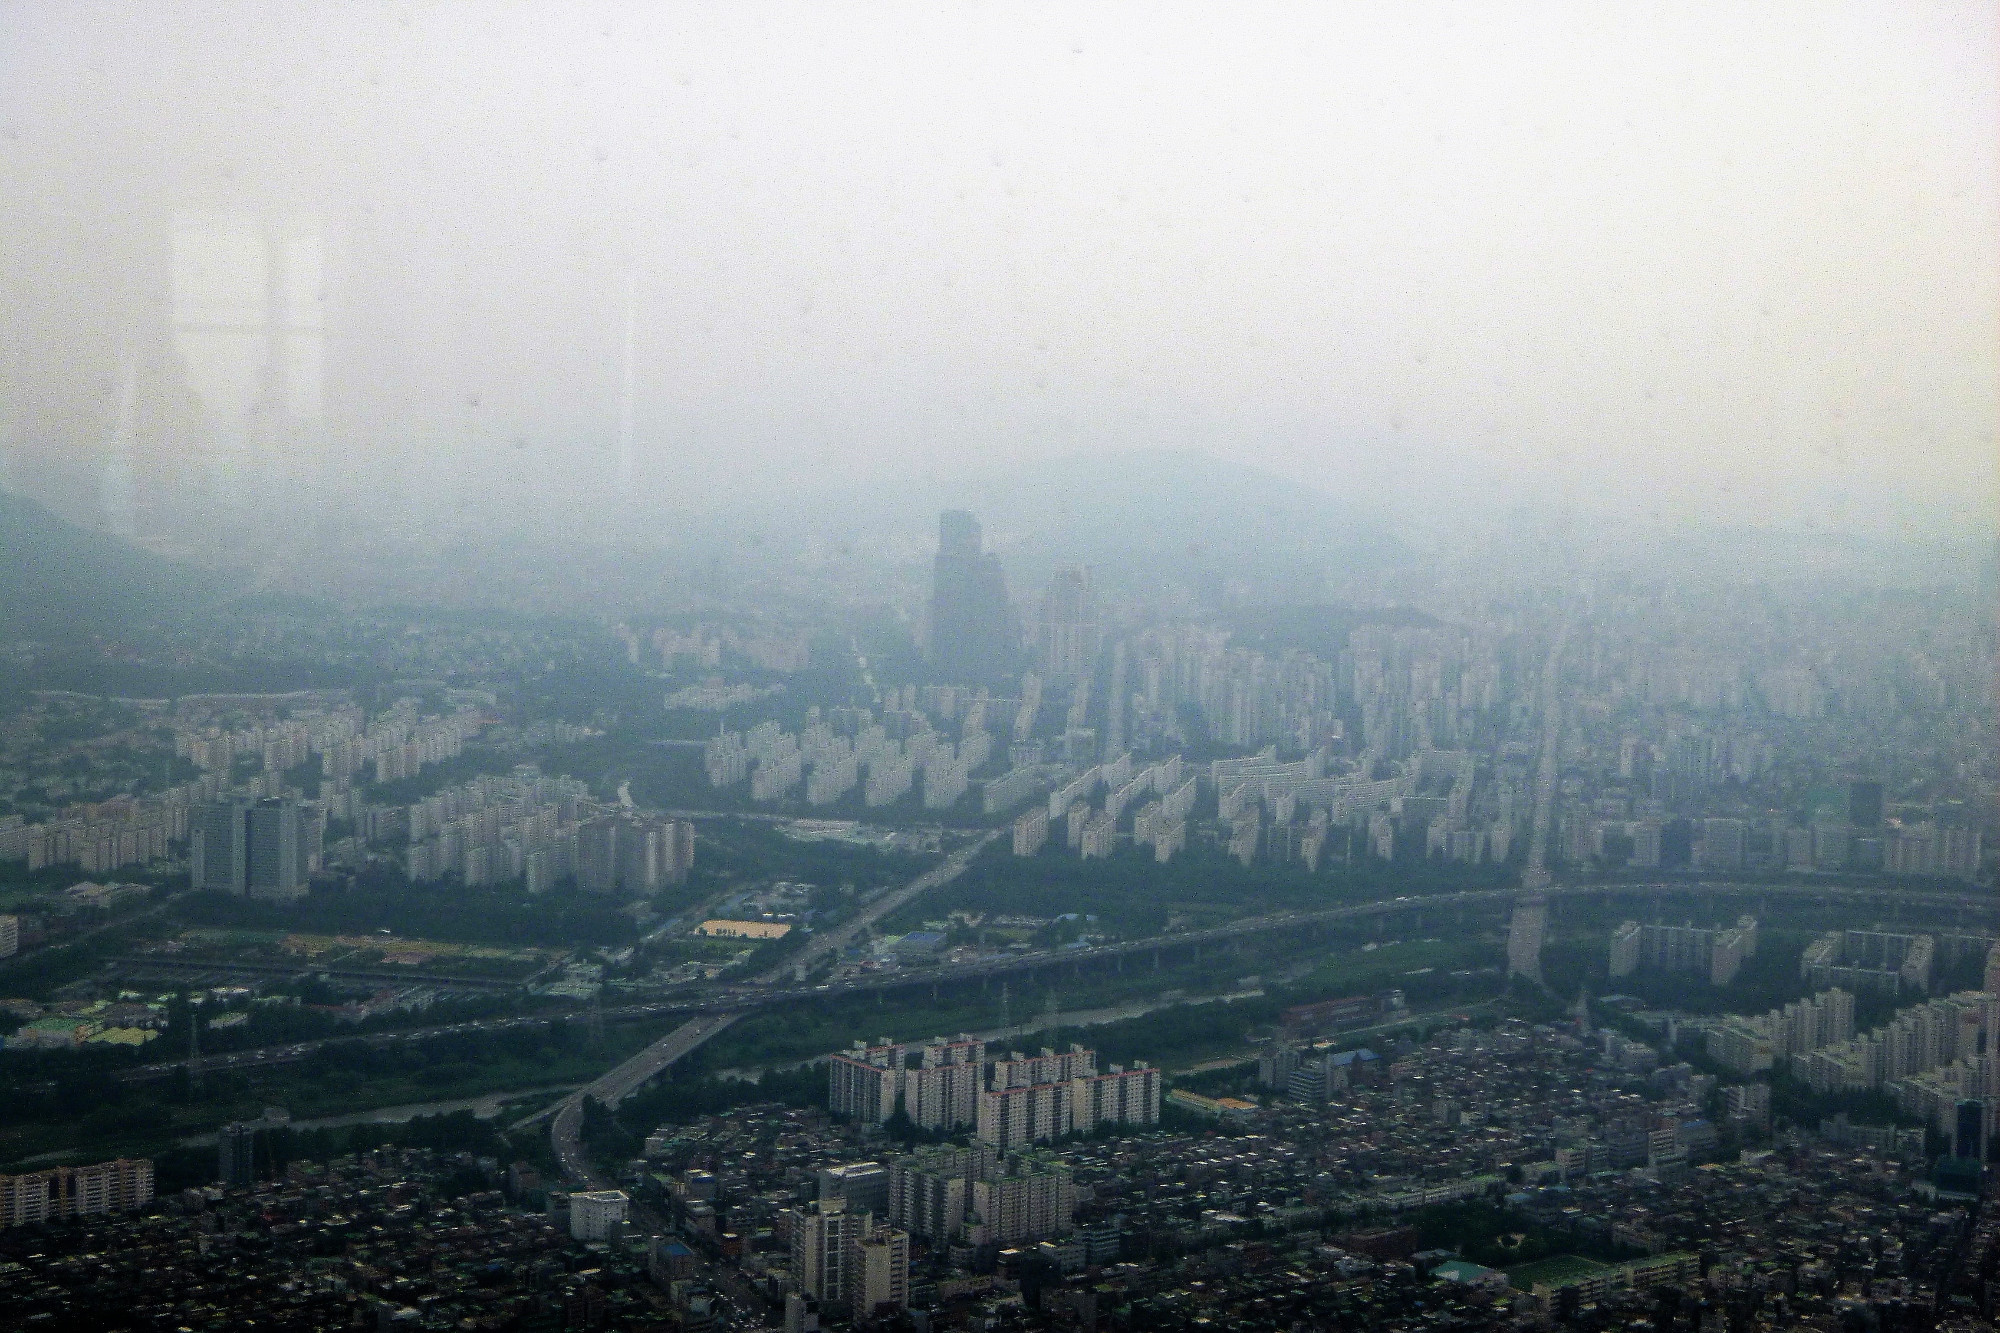 Smog obscured city views